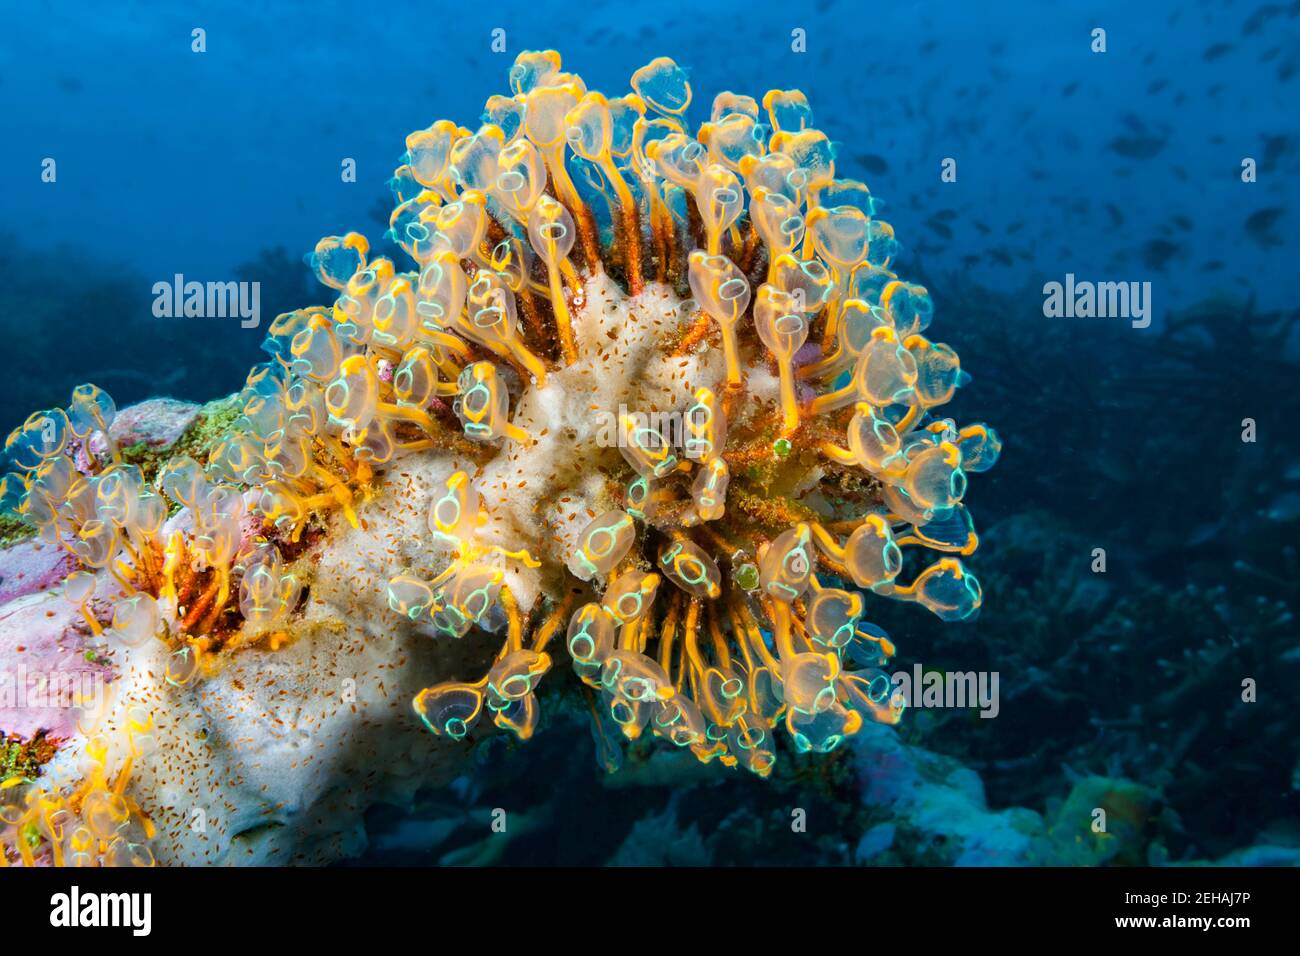 Sea squirts or tunicates, Pycnoclavella detorta, whose common name refers to a body covering of cellulose called a tunic, are complicated animals with Stock Photo